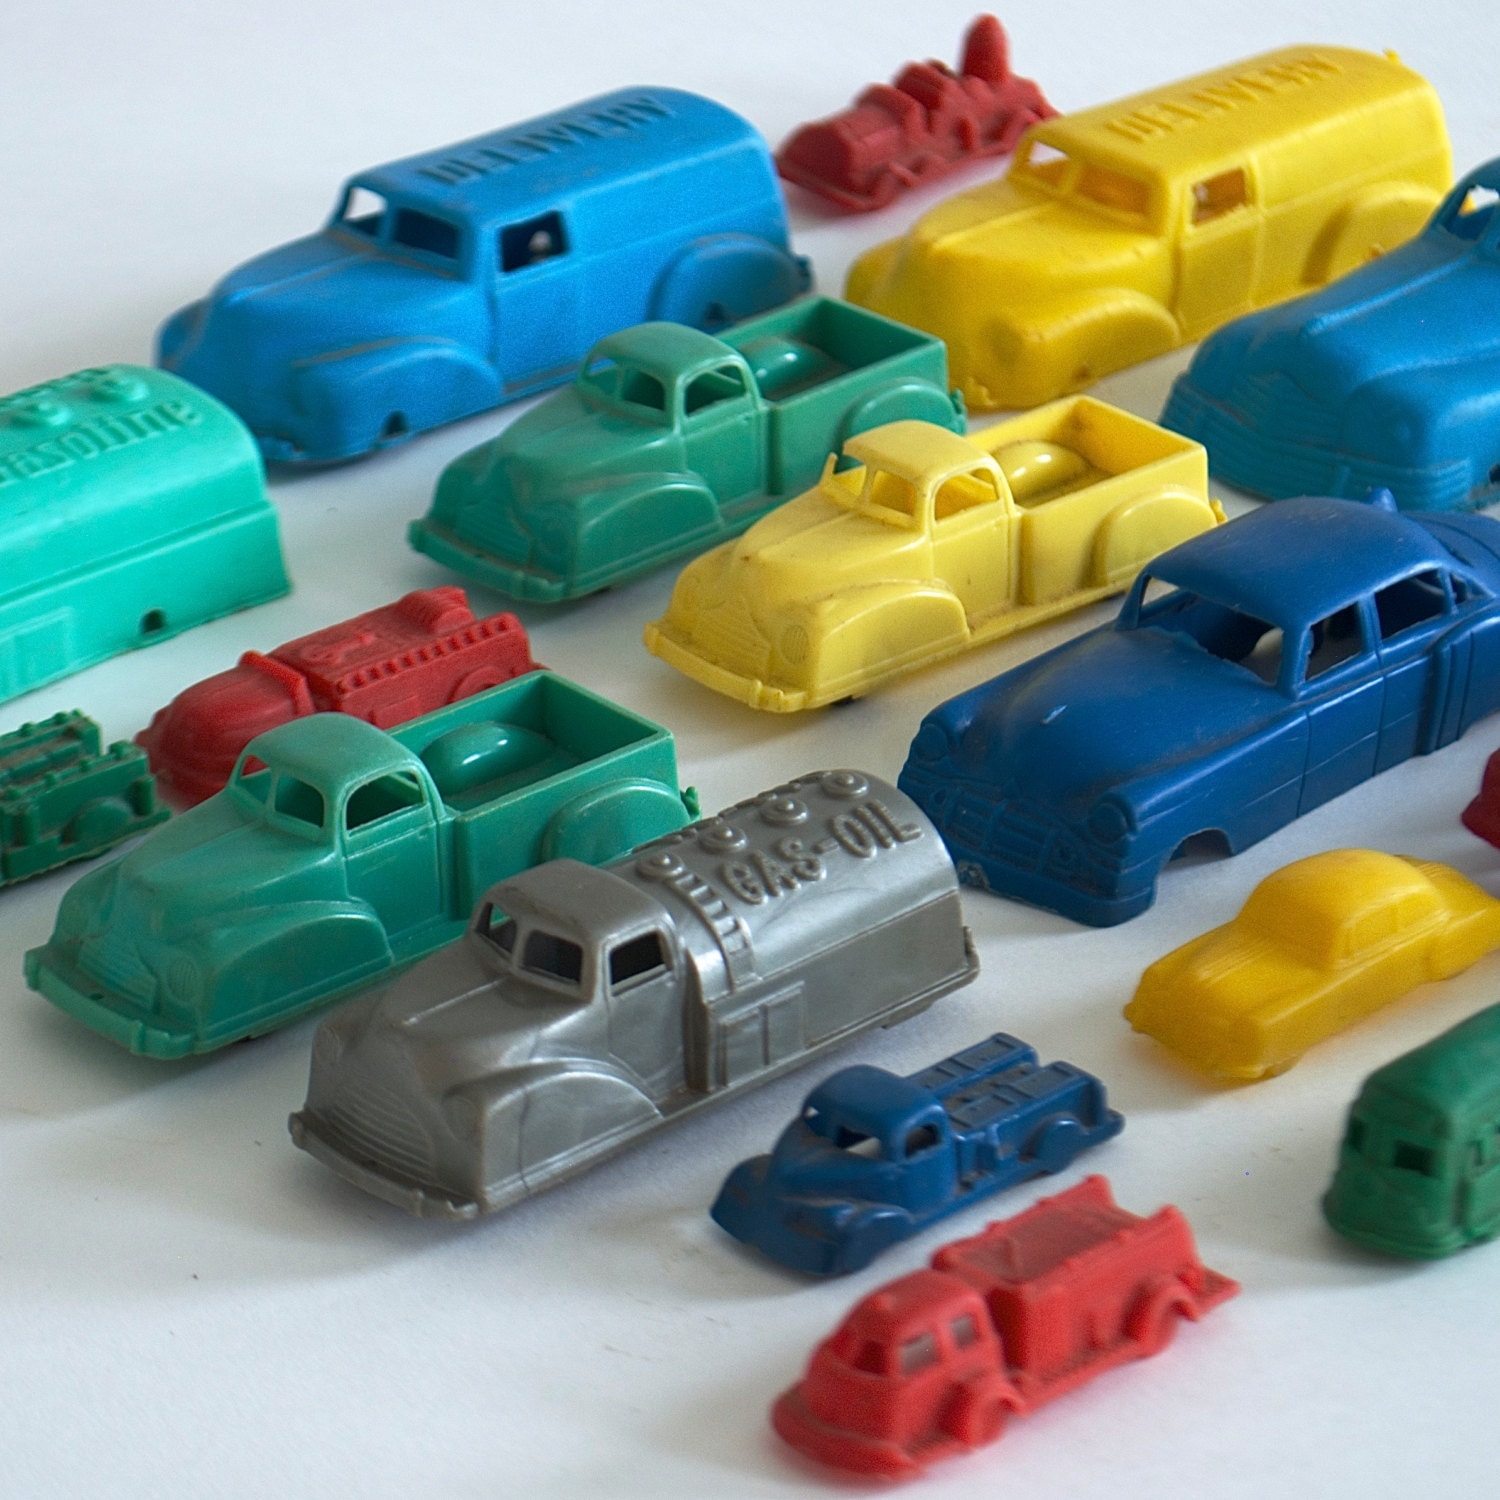 vintage plastic toy cars by homeandhomme on Etsy